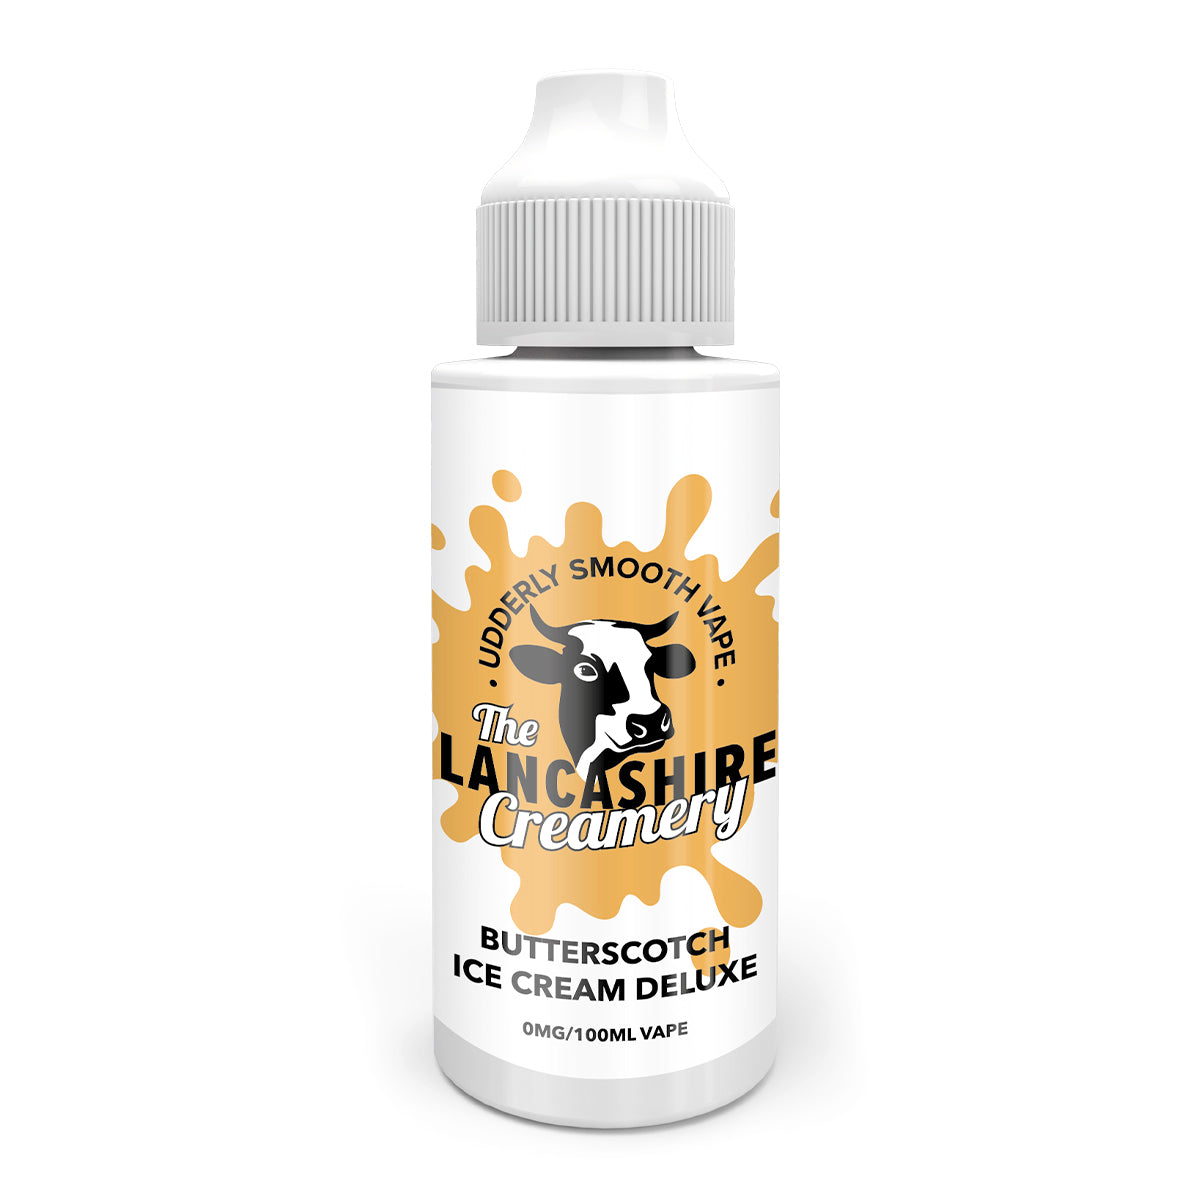 Butterscotch Ice Cream Deluxe 100ml Shortfill by The Lancashire Creamery